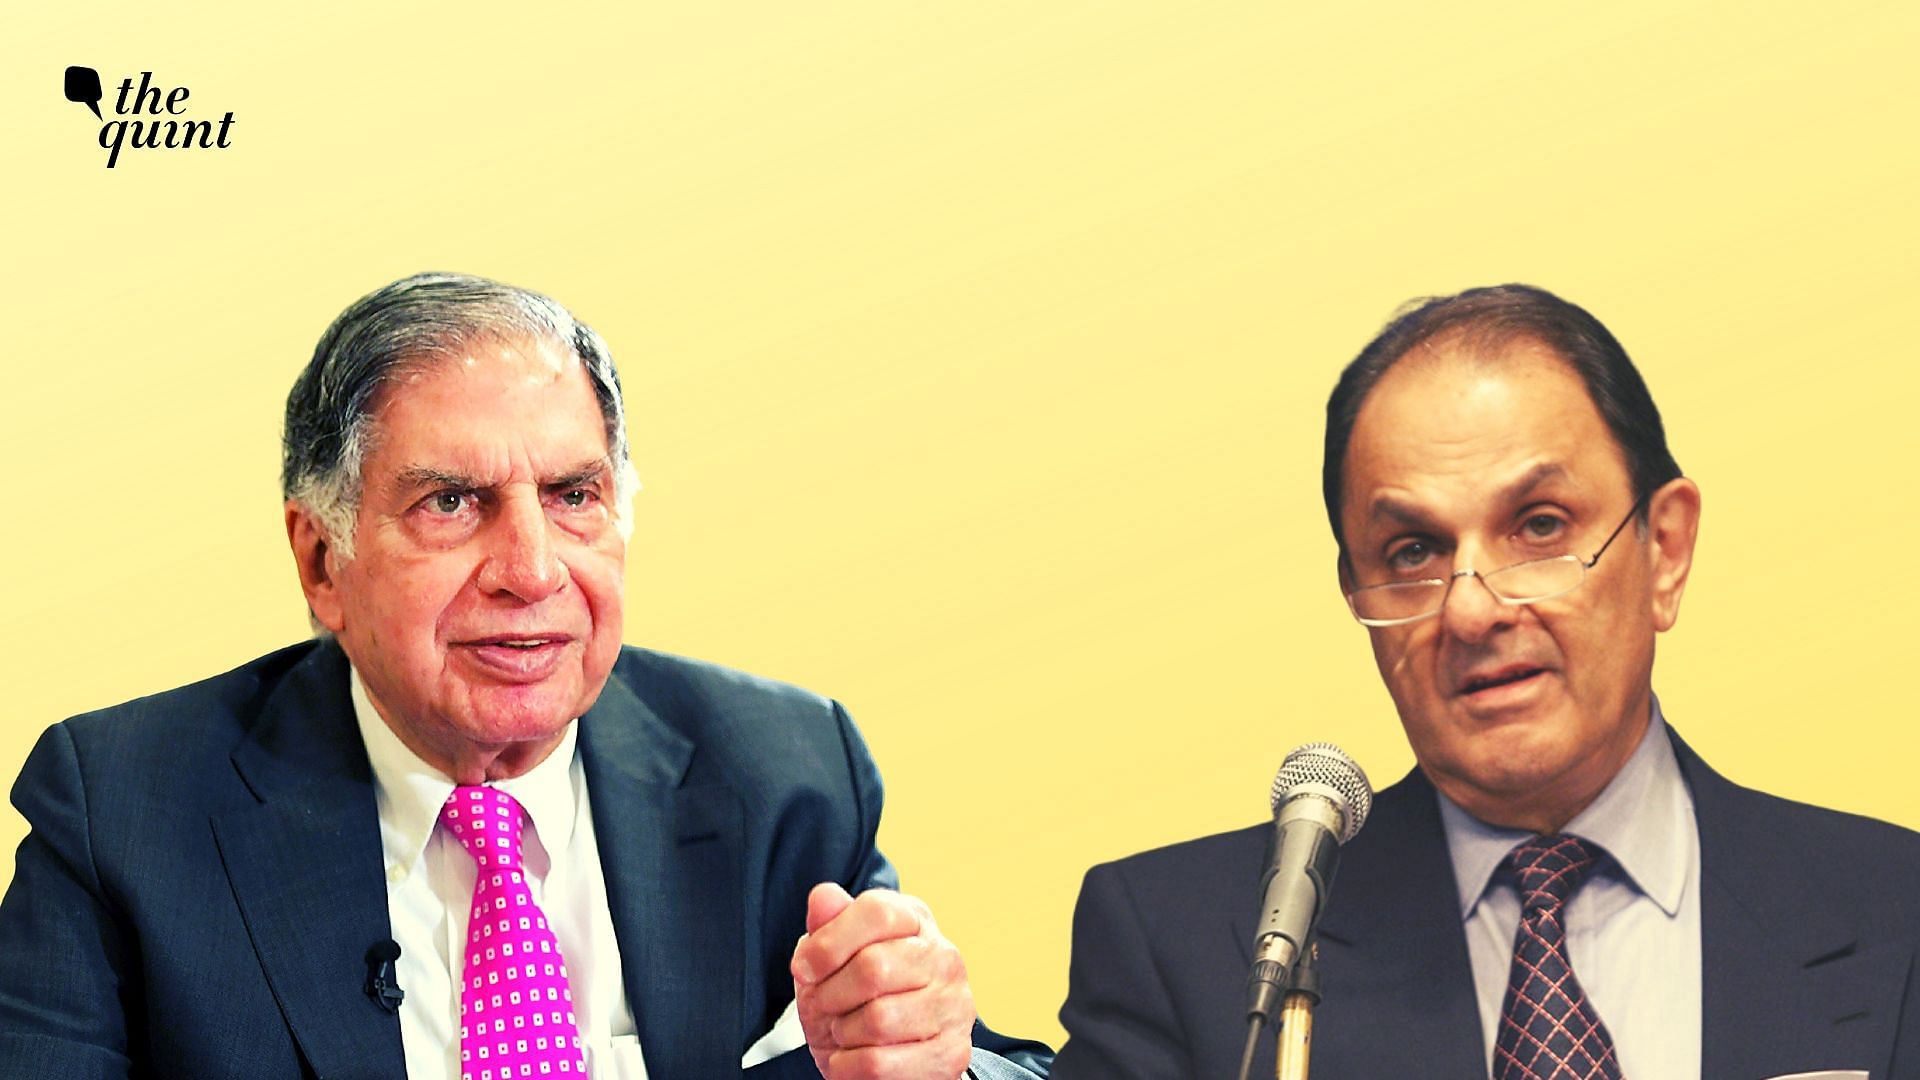 The Supreme Court asked Bombay Dyeing chairman Nusli Wadia and Ratan Tata, chairman emeritus of Tata Sons, to sit together and resolve their differences in a defamation case on 6 January.